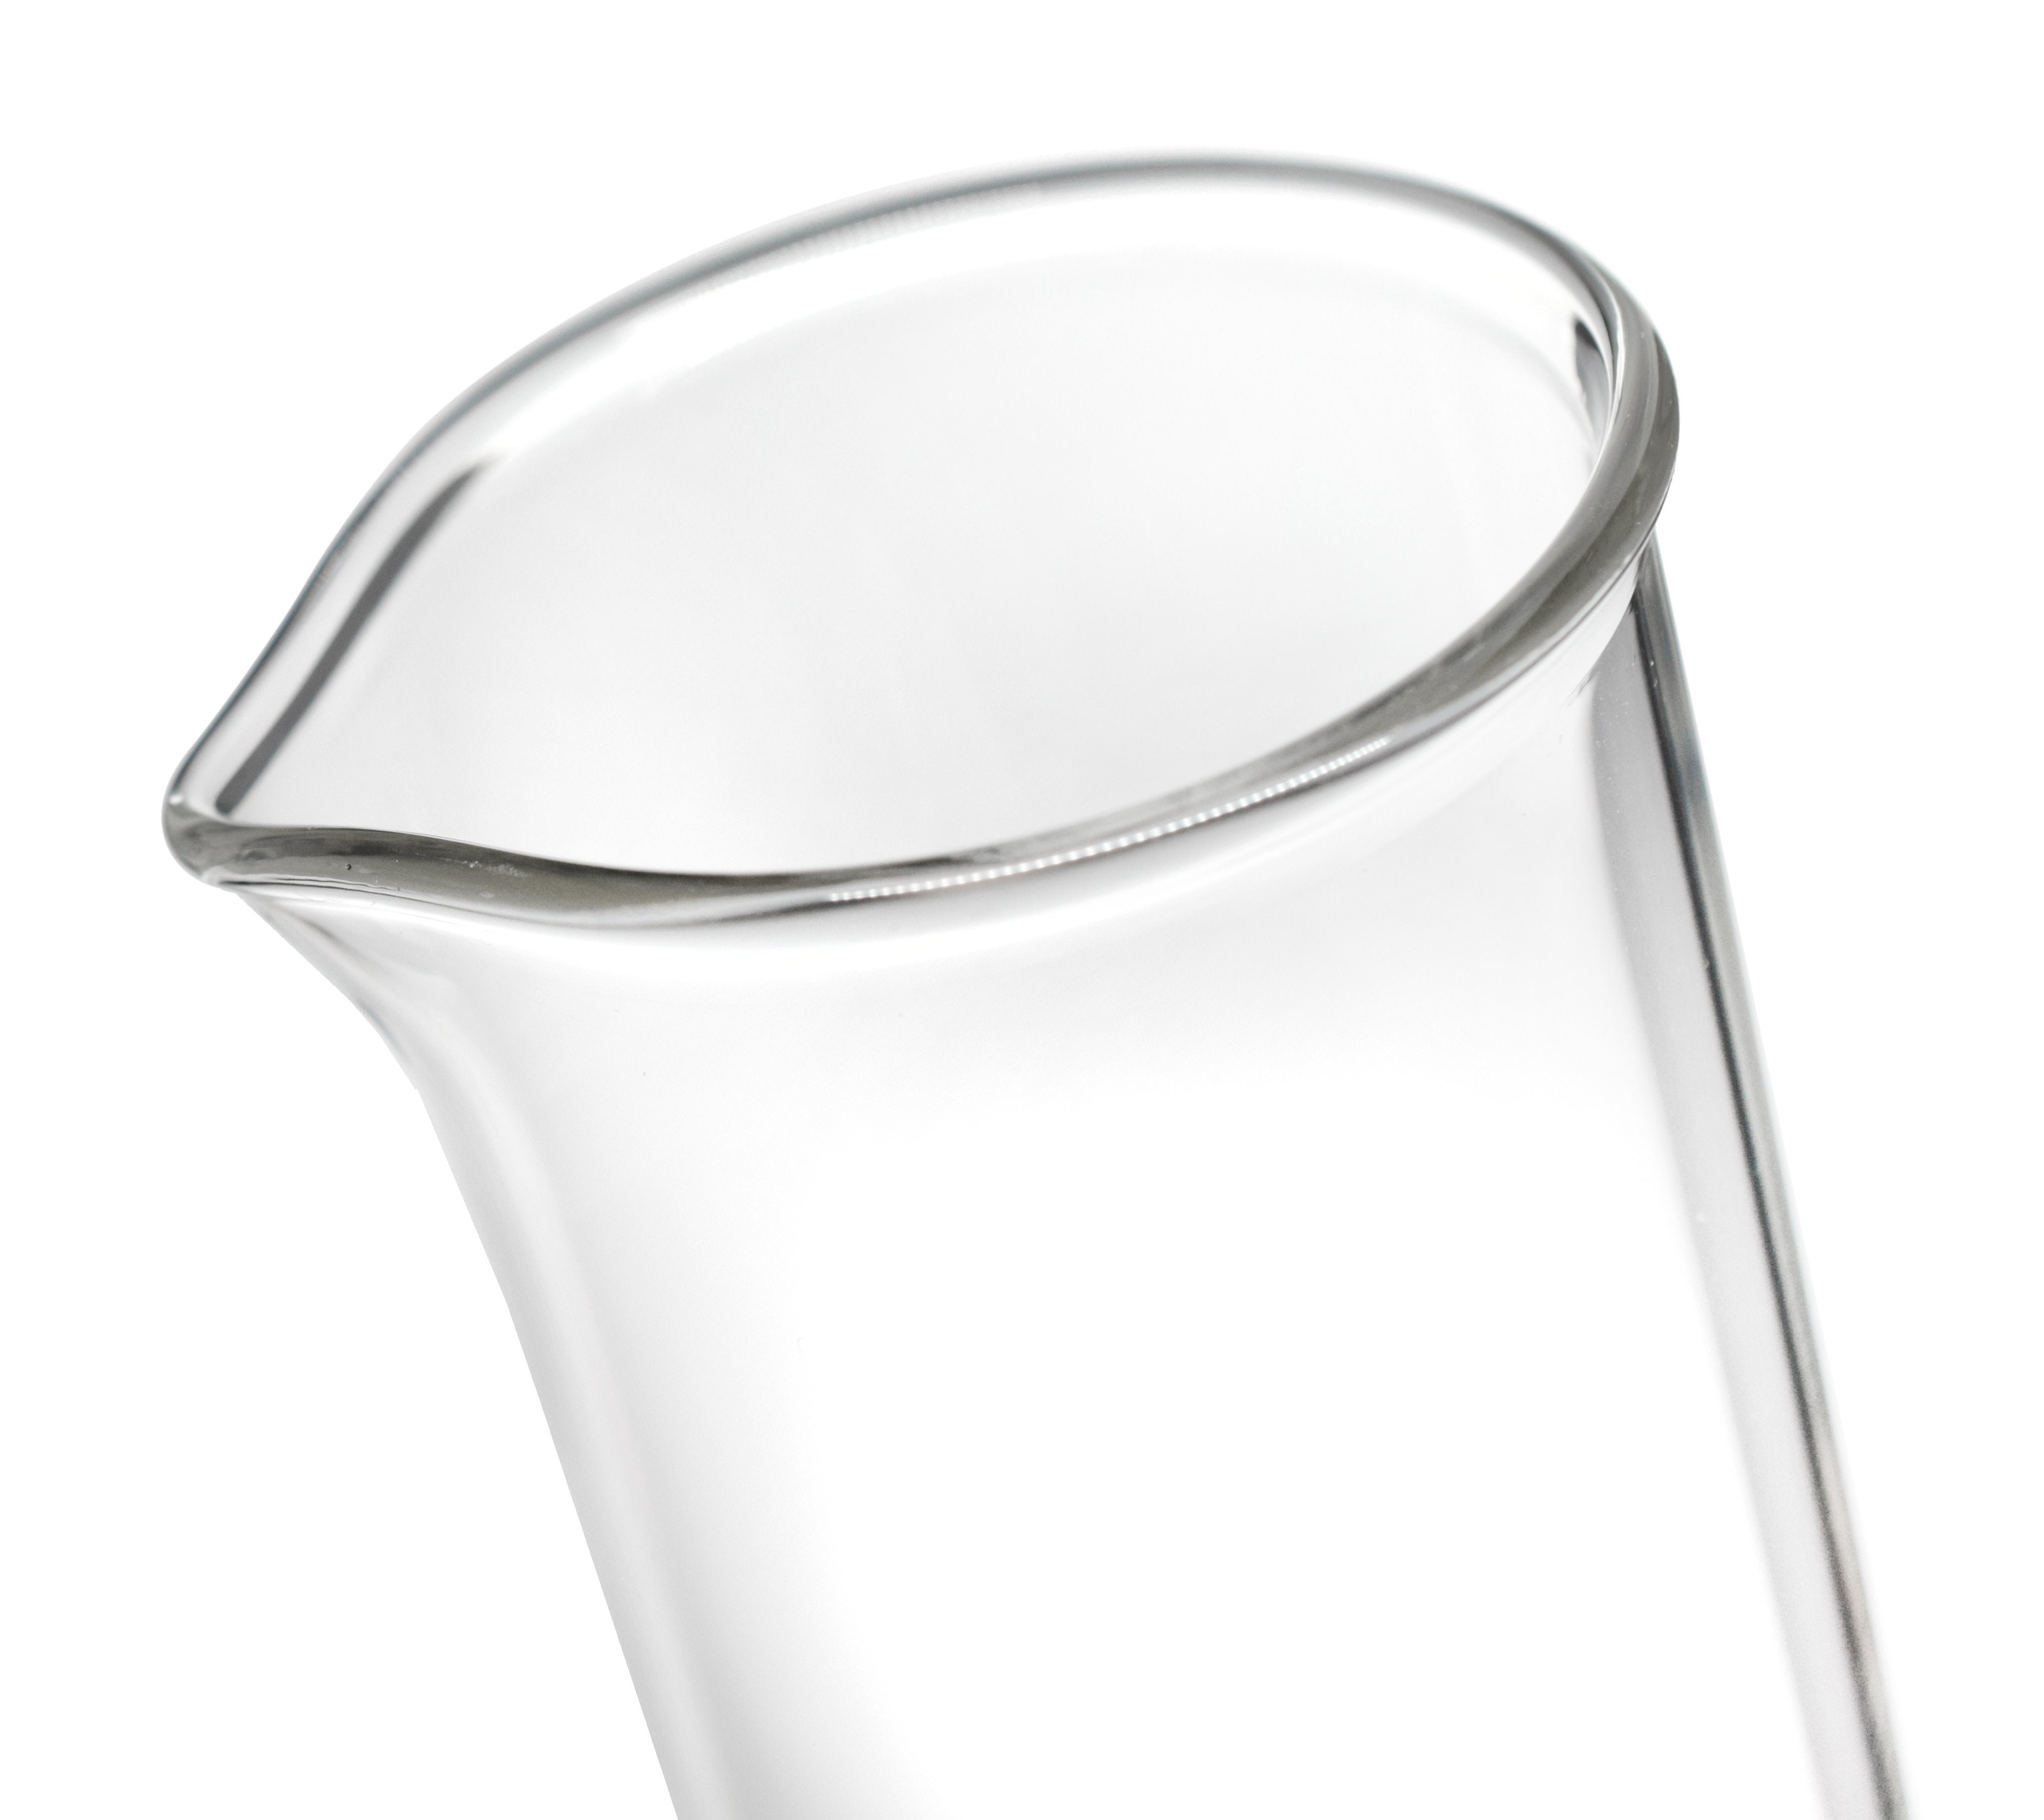 Borosilicate Glass Graduated Cylinder with Guard, 250 ml, 2.0 ml Graduation, Class A, ASTM, Autoclavable